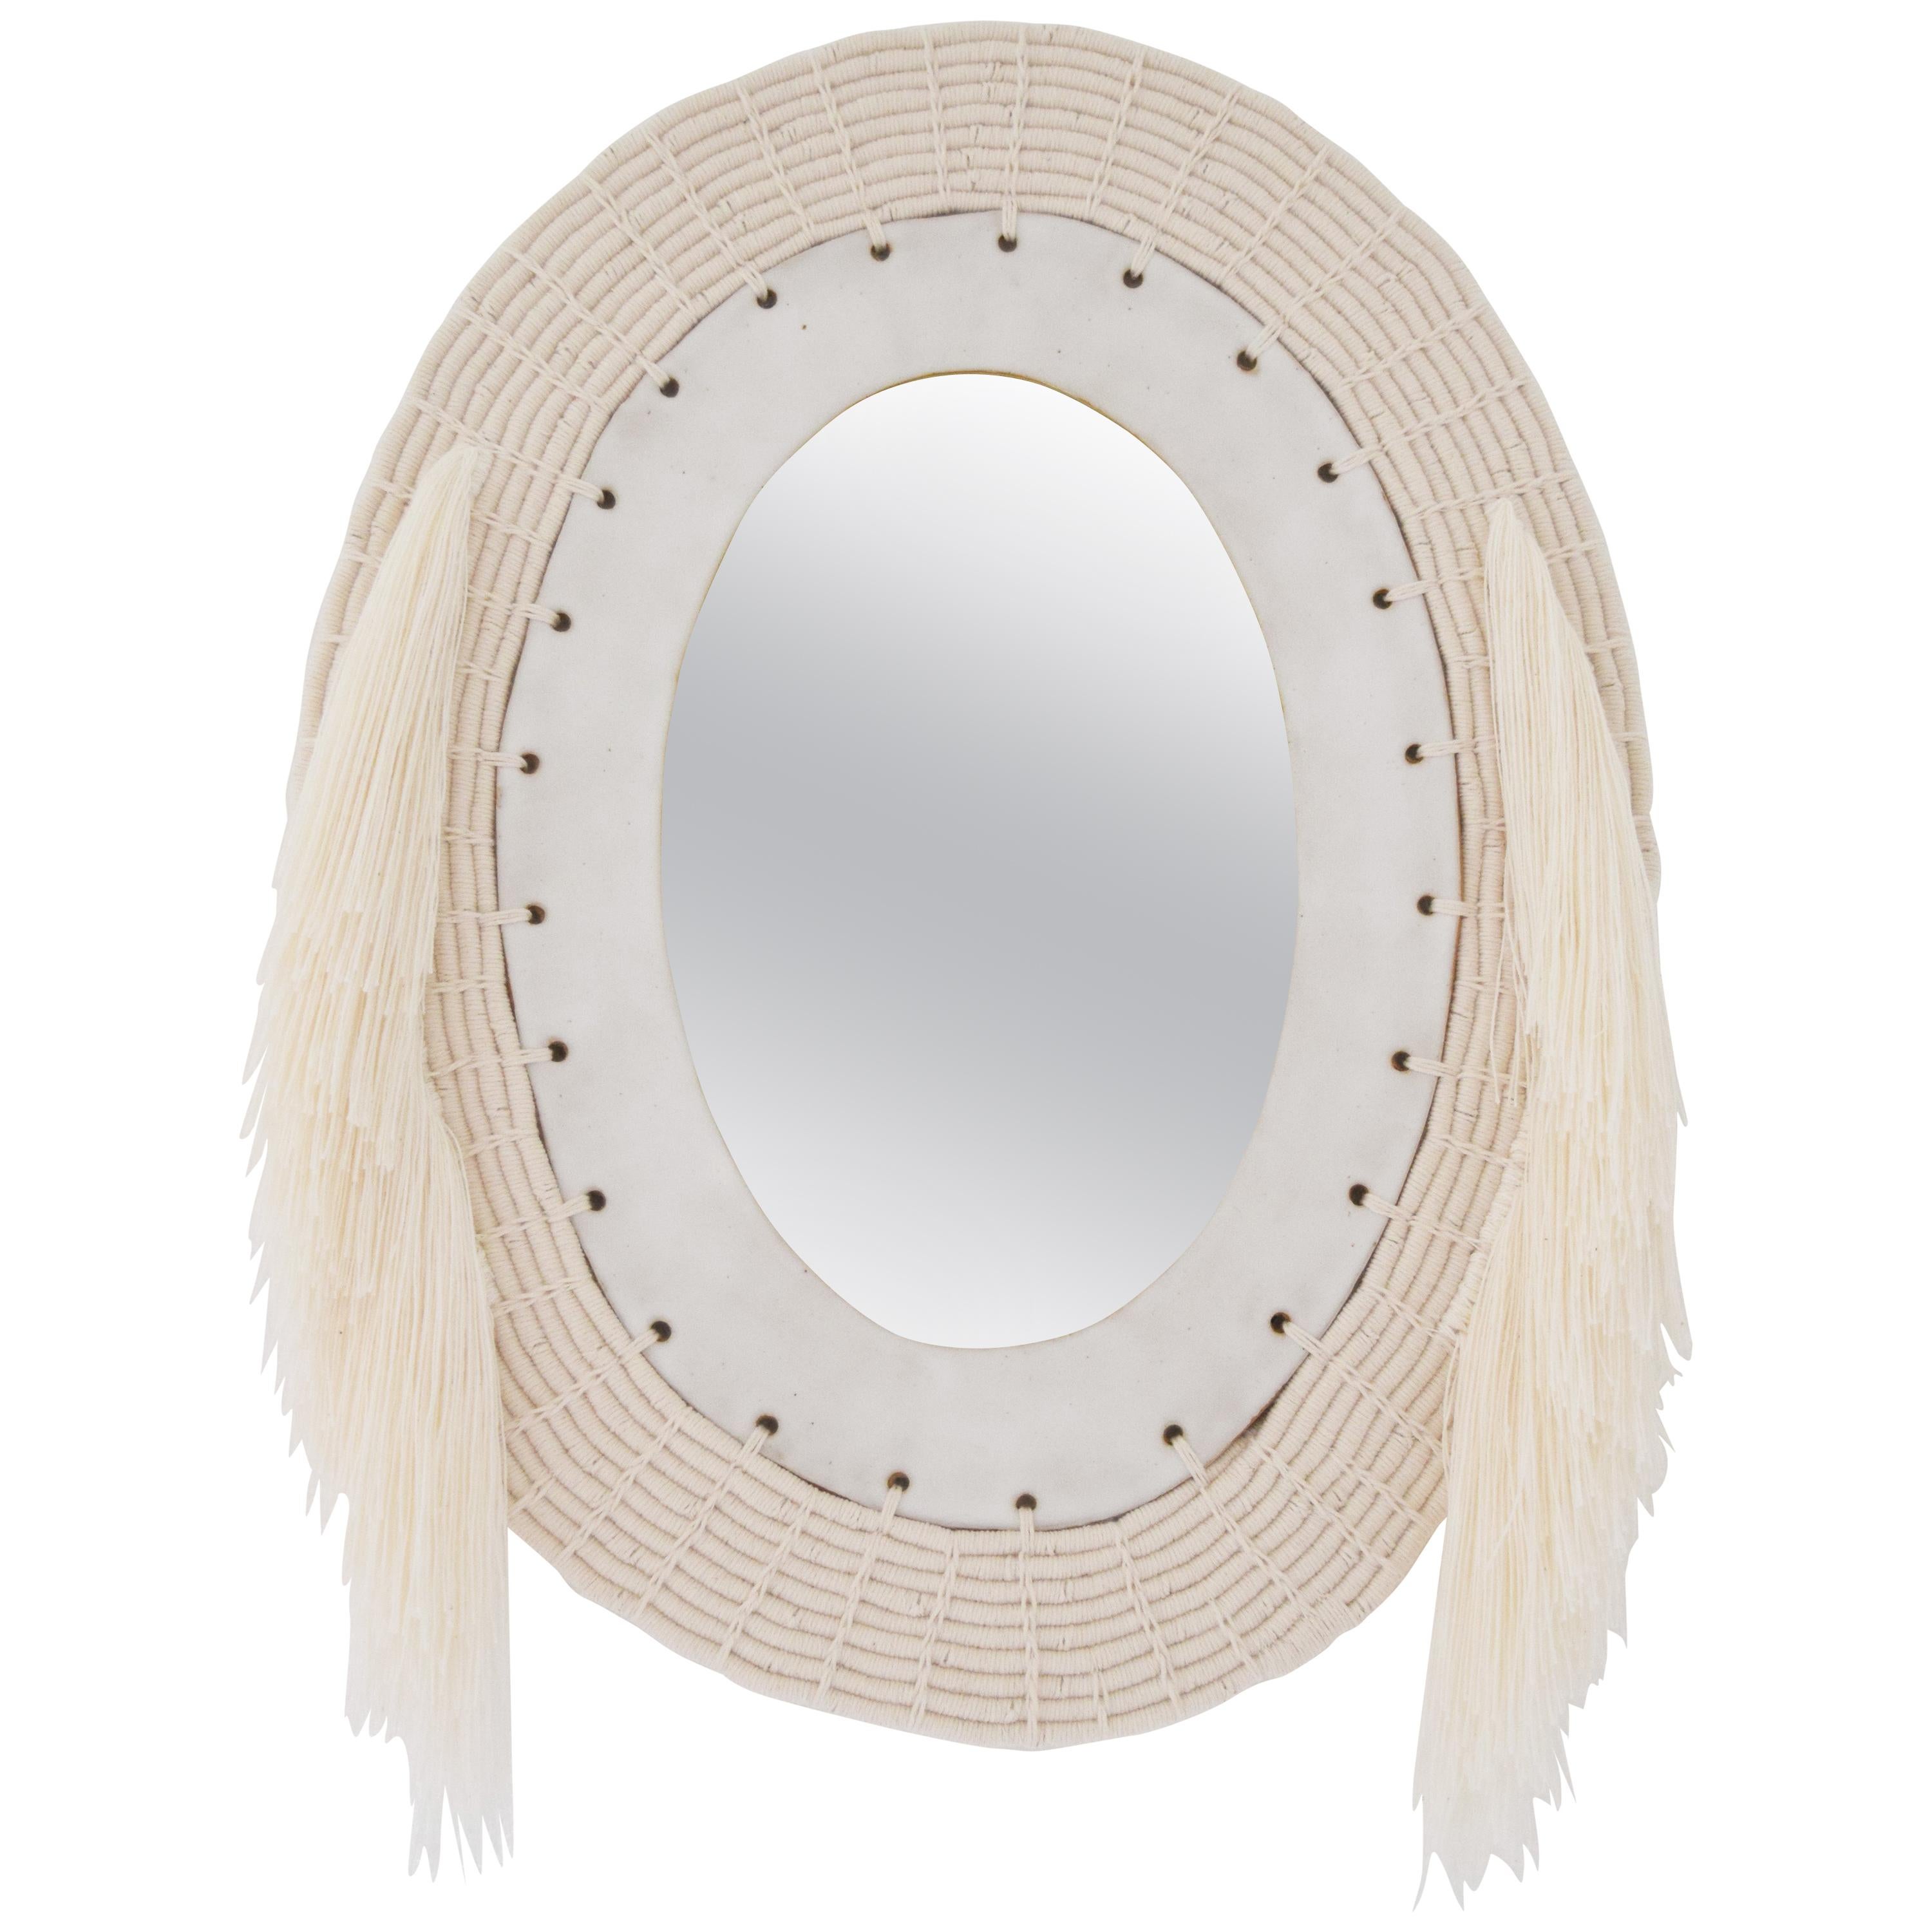 One of a Kind Woven Cotton and Ceramic Oval Mirror in White